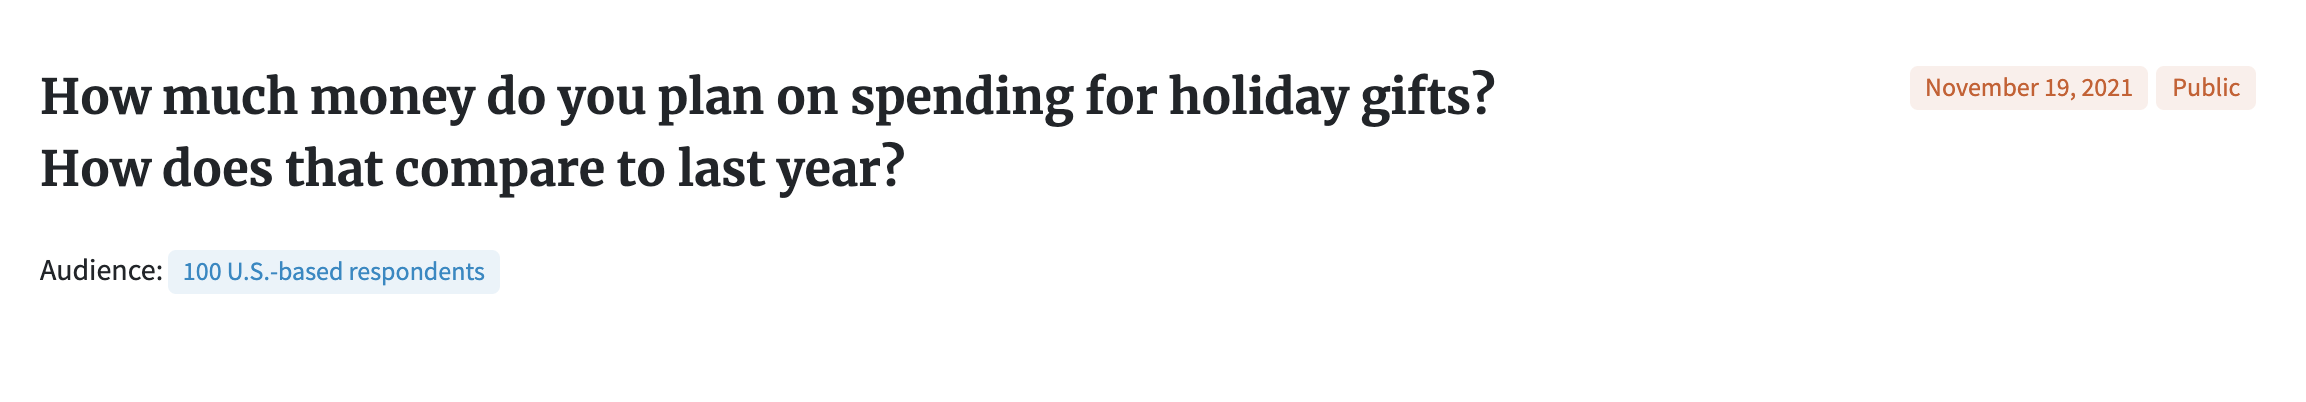 PickFu holiday shopping poll: screenshot of poll asking how much people spend on holiday gifts